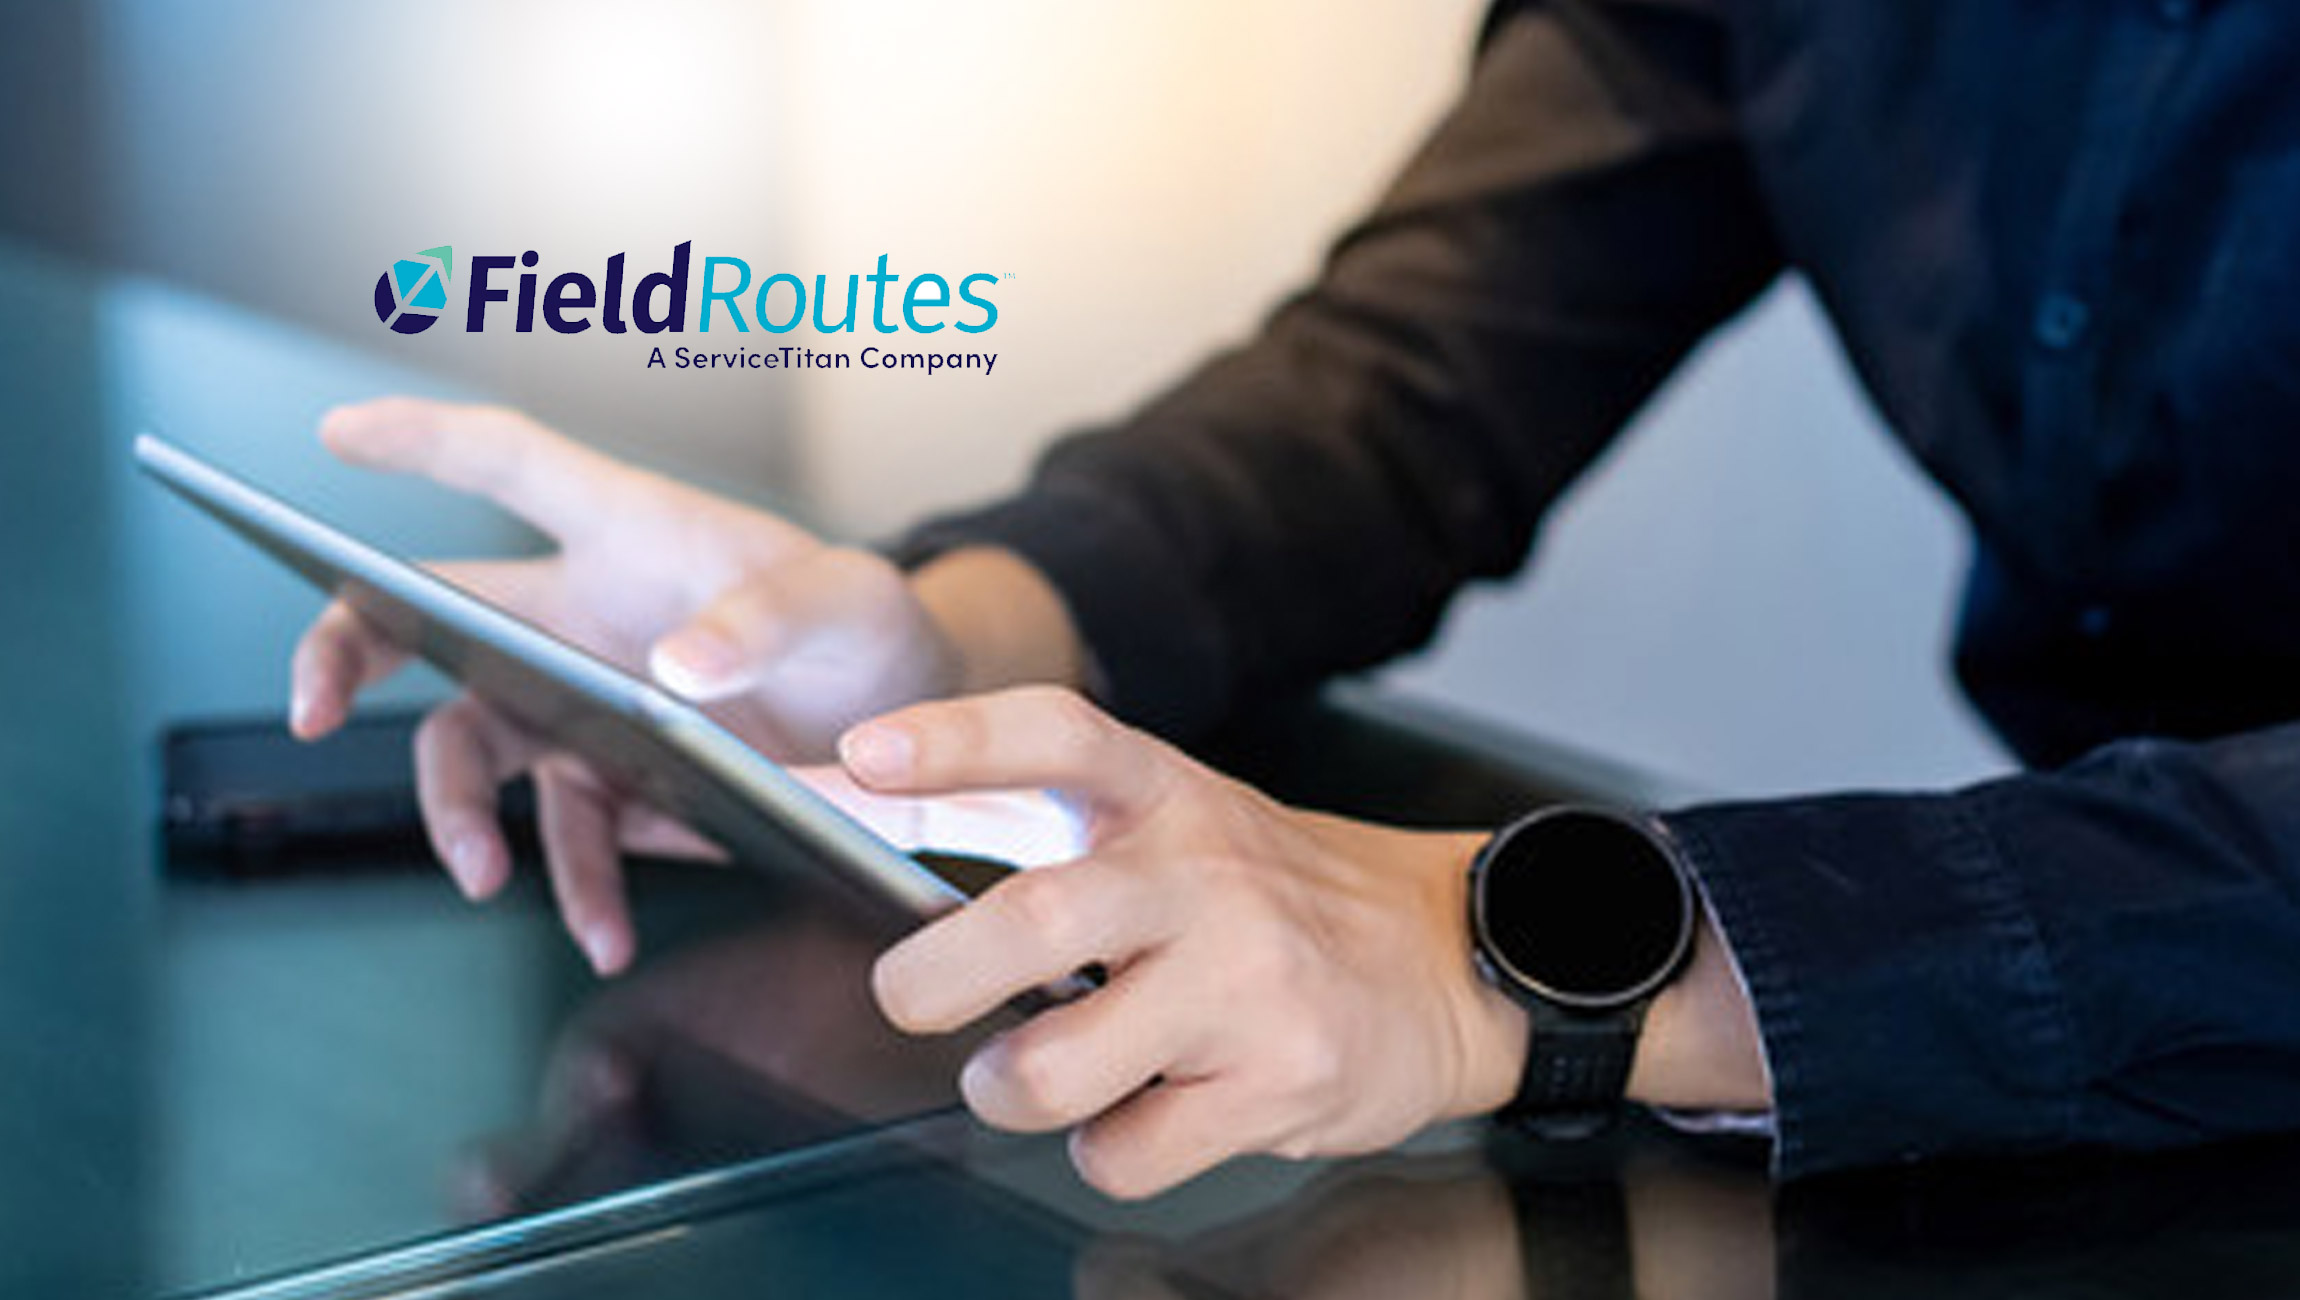 FieldRoutes Launches Mobile App to Deliver Sales and Service Functionality for Employees in the Field